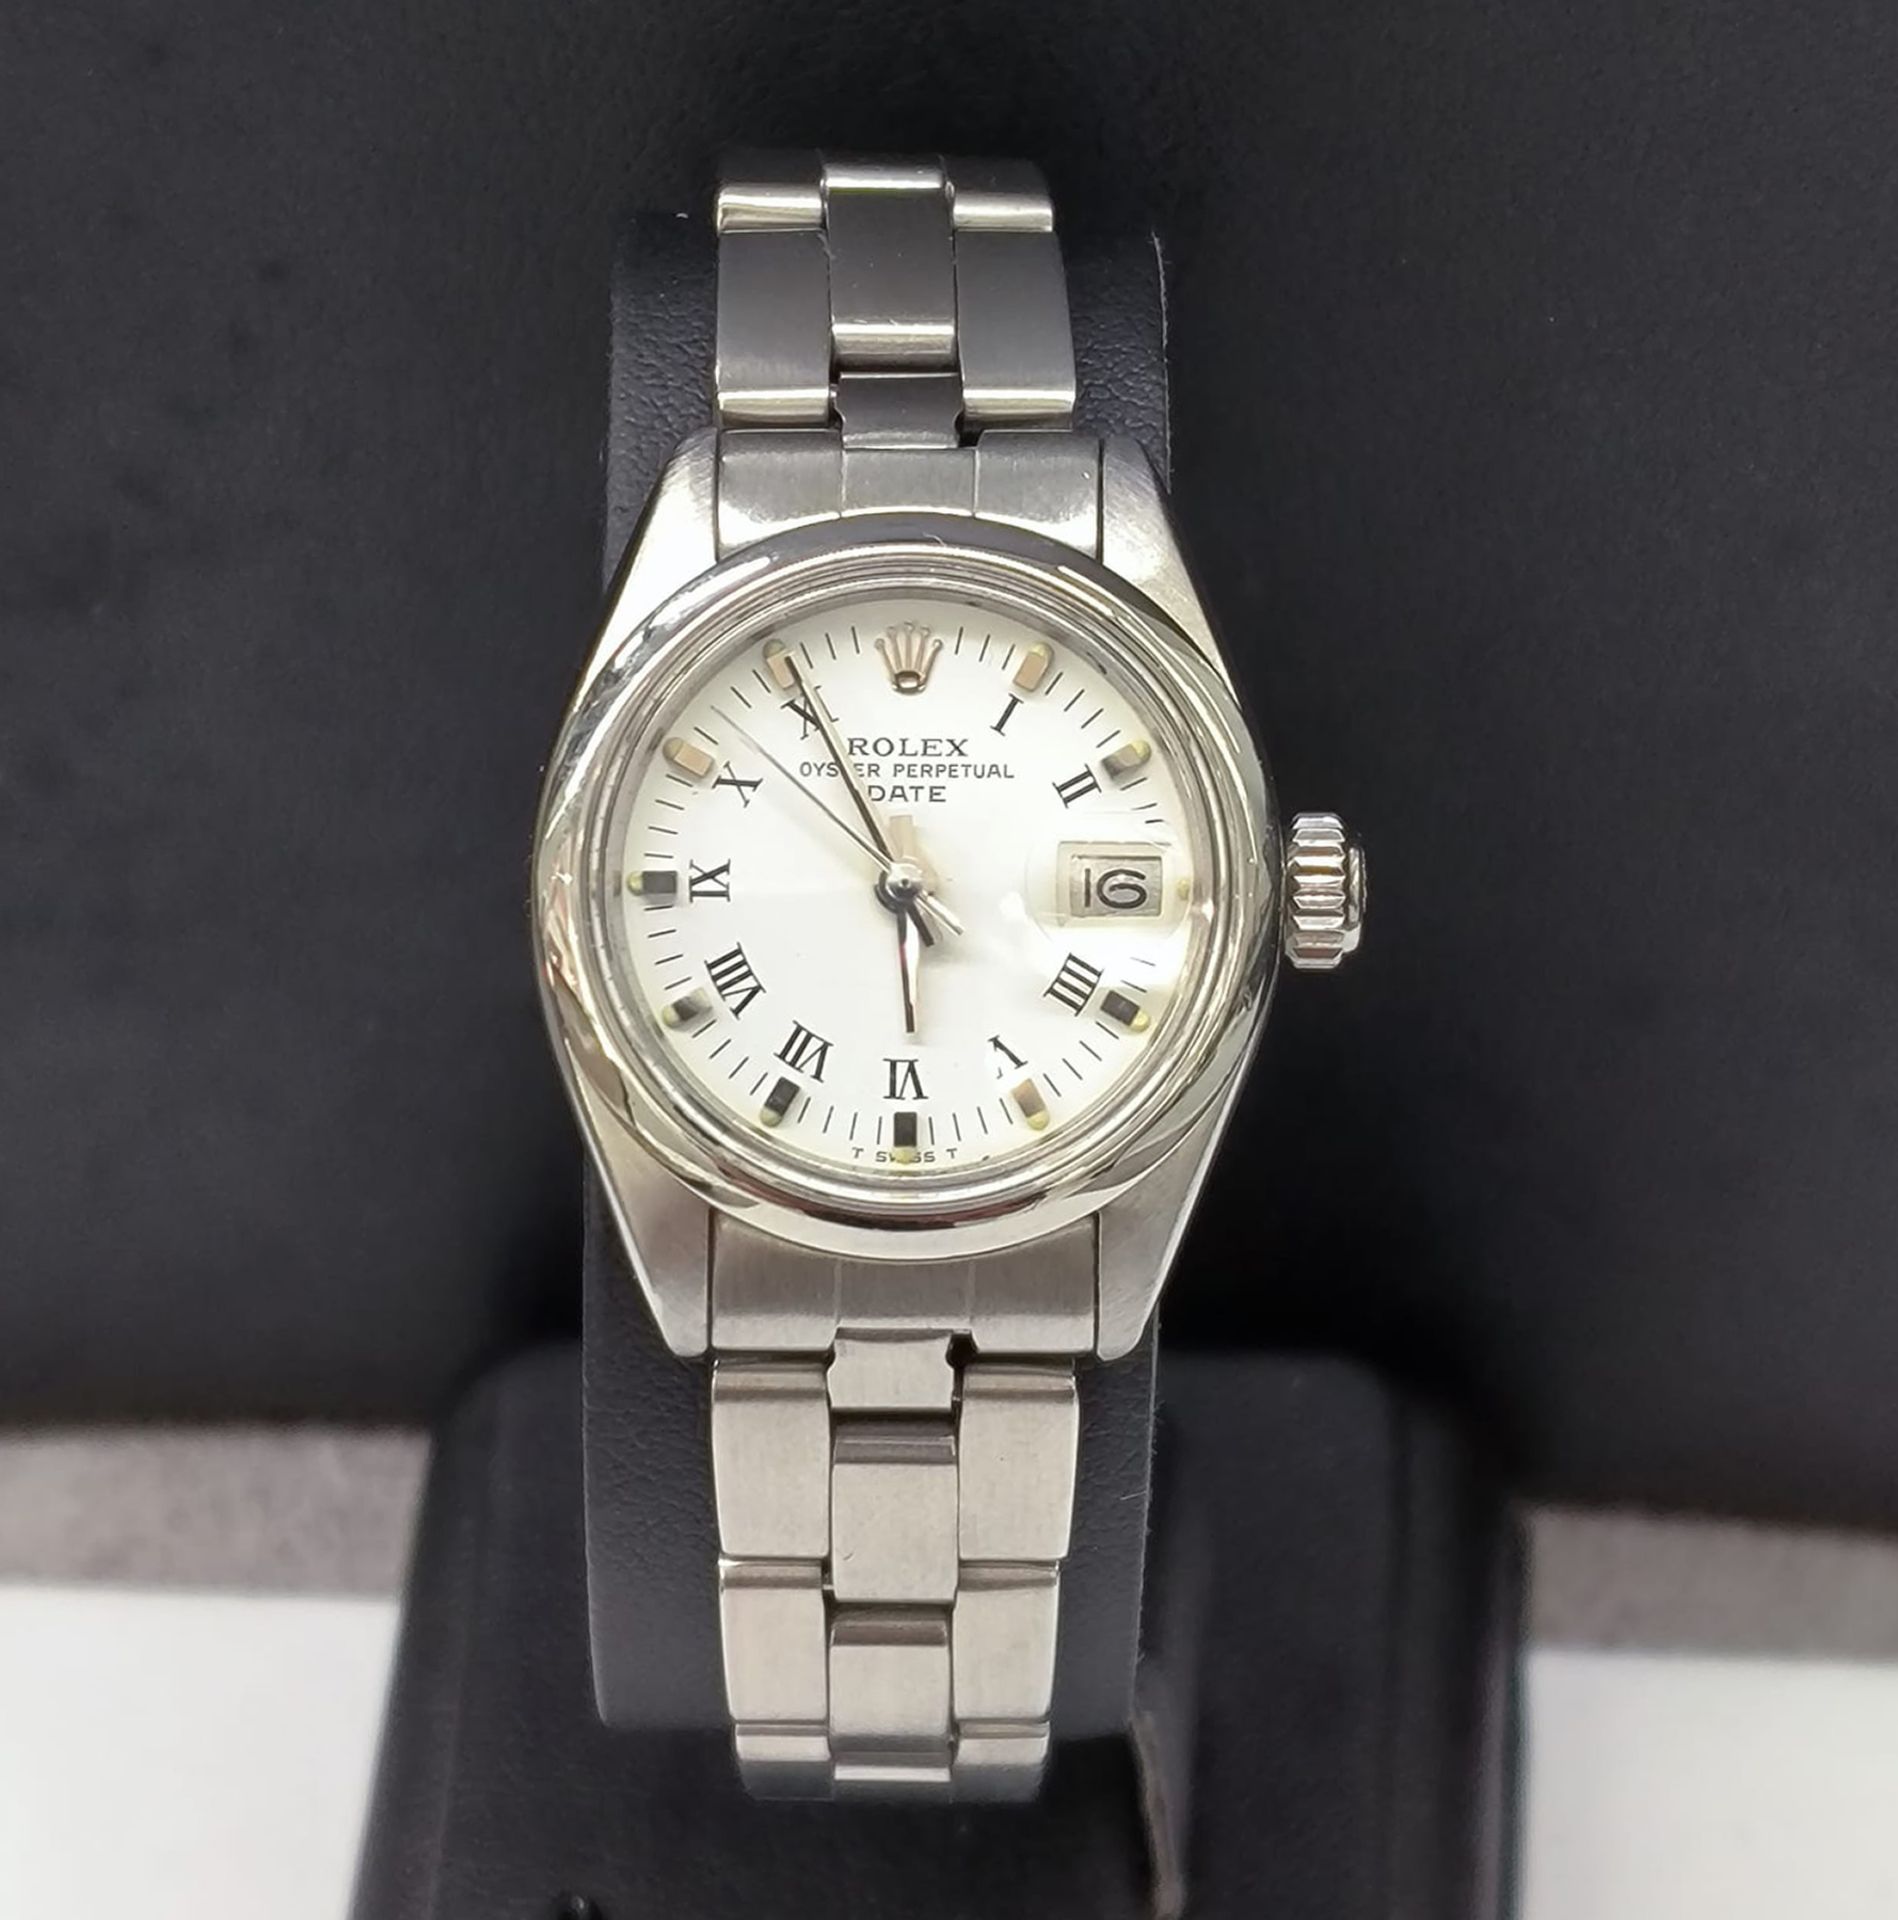 Rolex Oyster Perpetual Date, 1980s